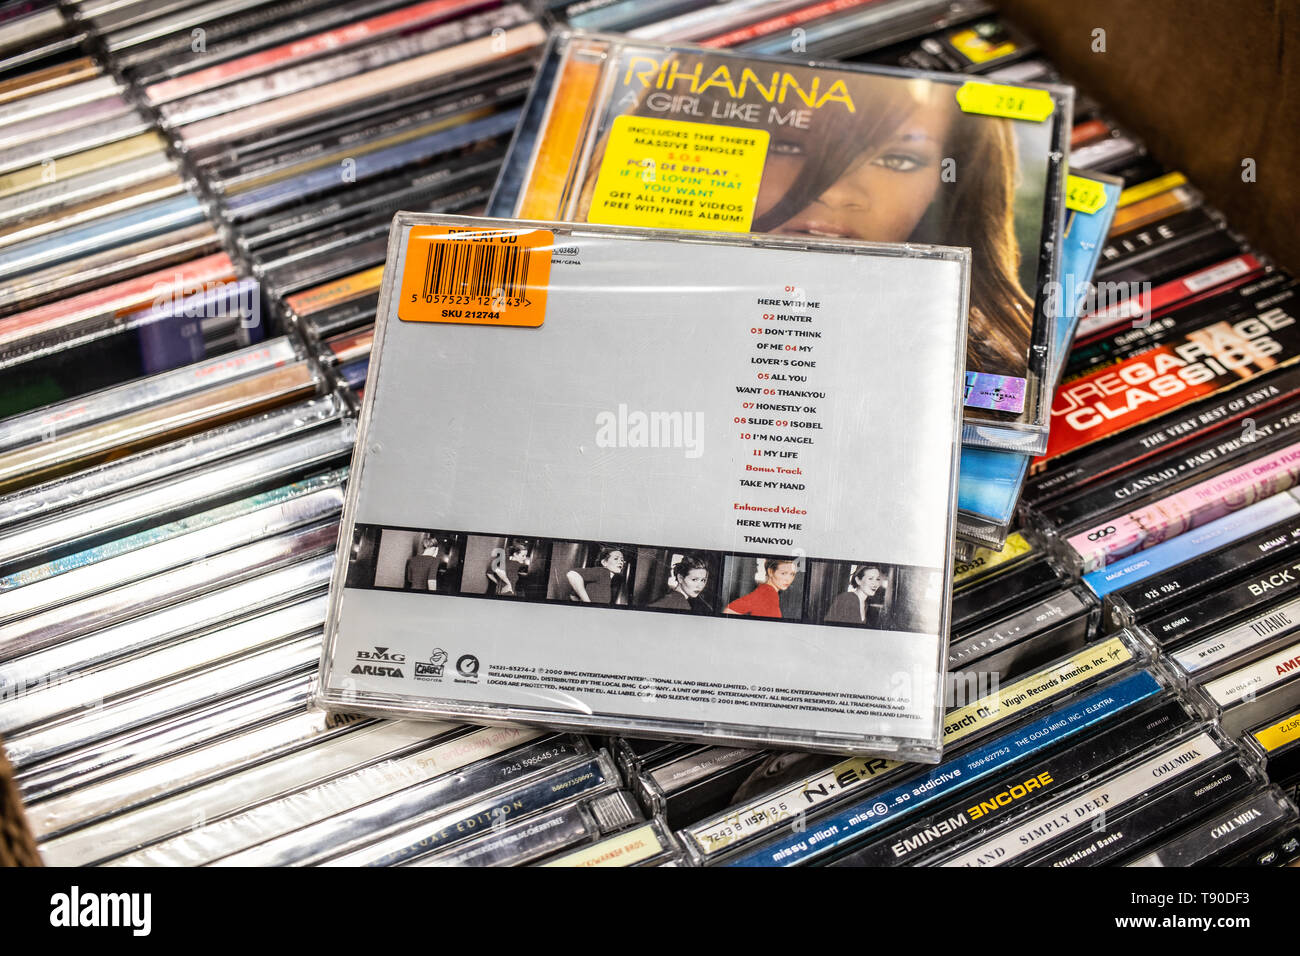 Nadarzyn, Poland, May 11, 2019: Dido CD album No Angel 1999 on display for sale, famous English singer and songwriter, collection of CD music albums Stock Photo